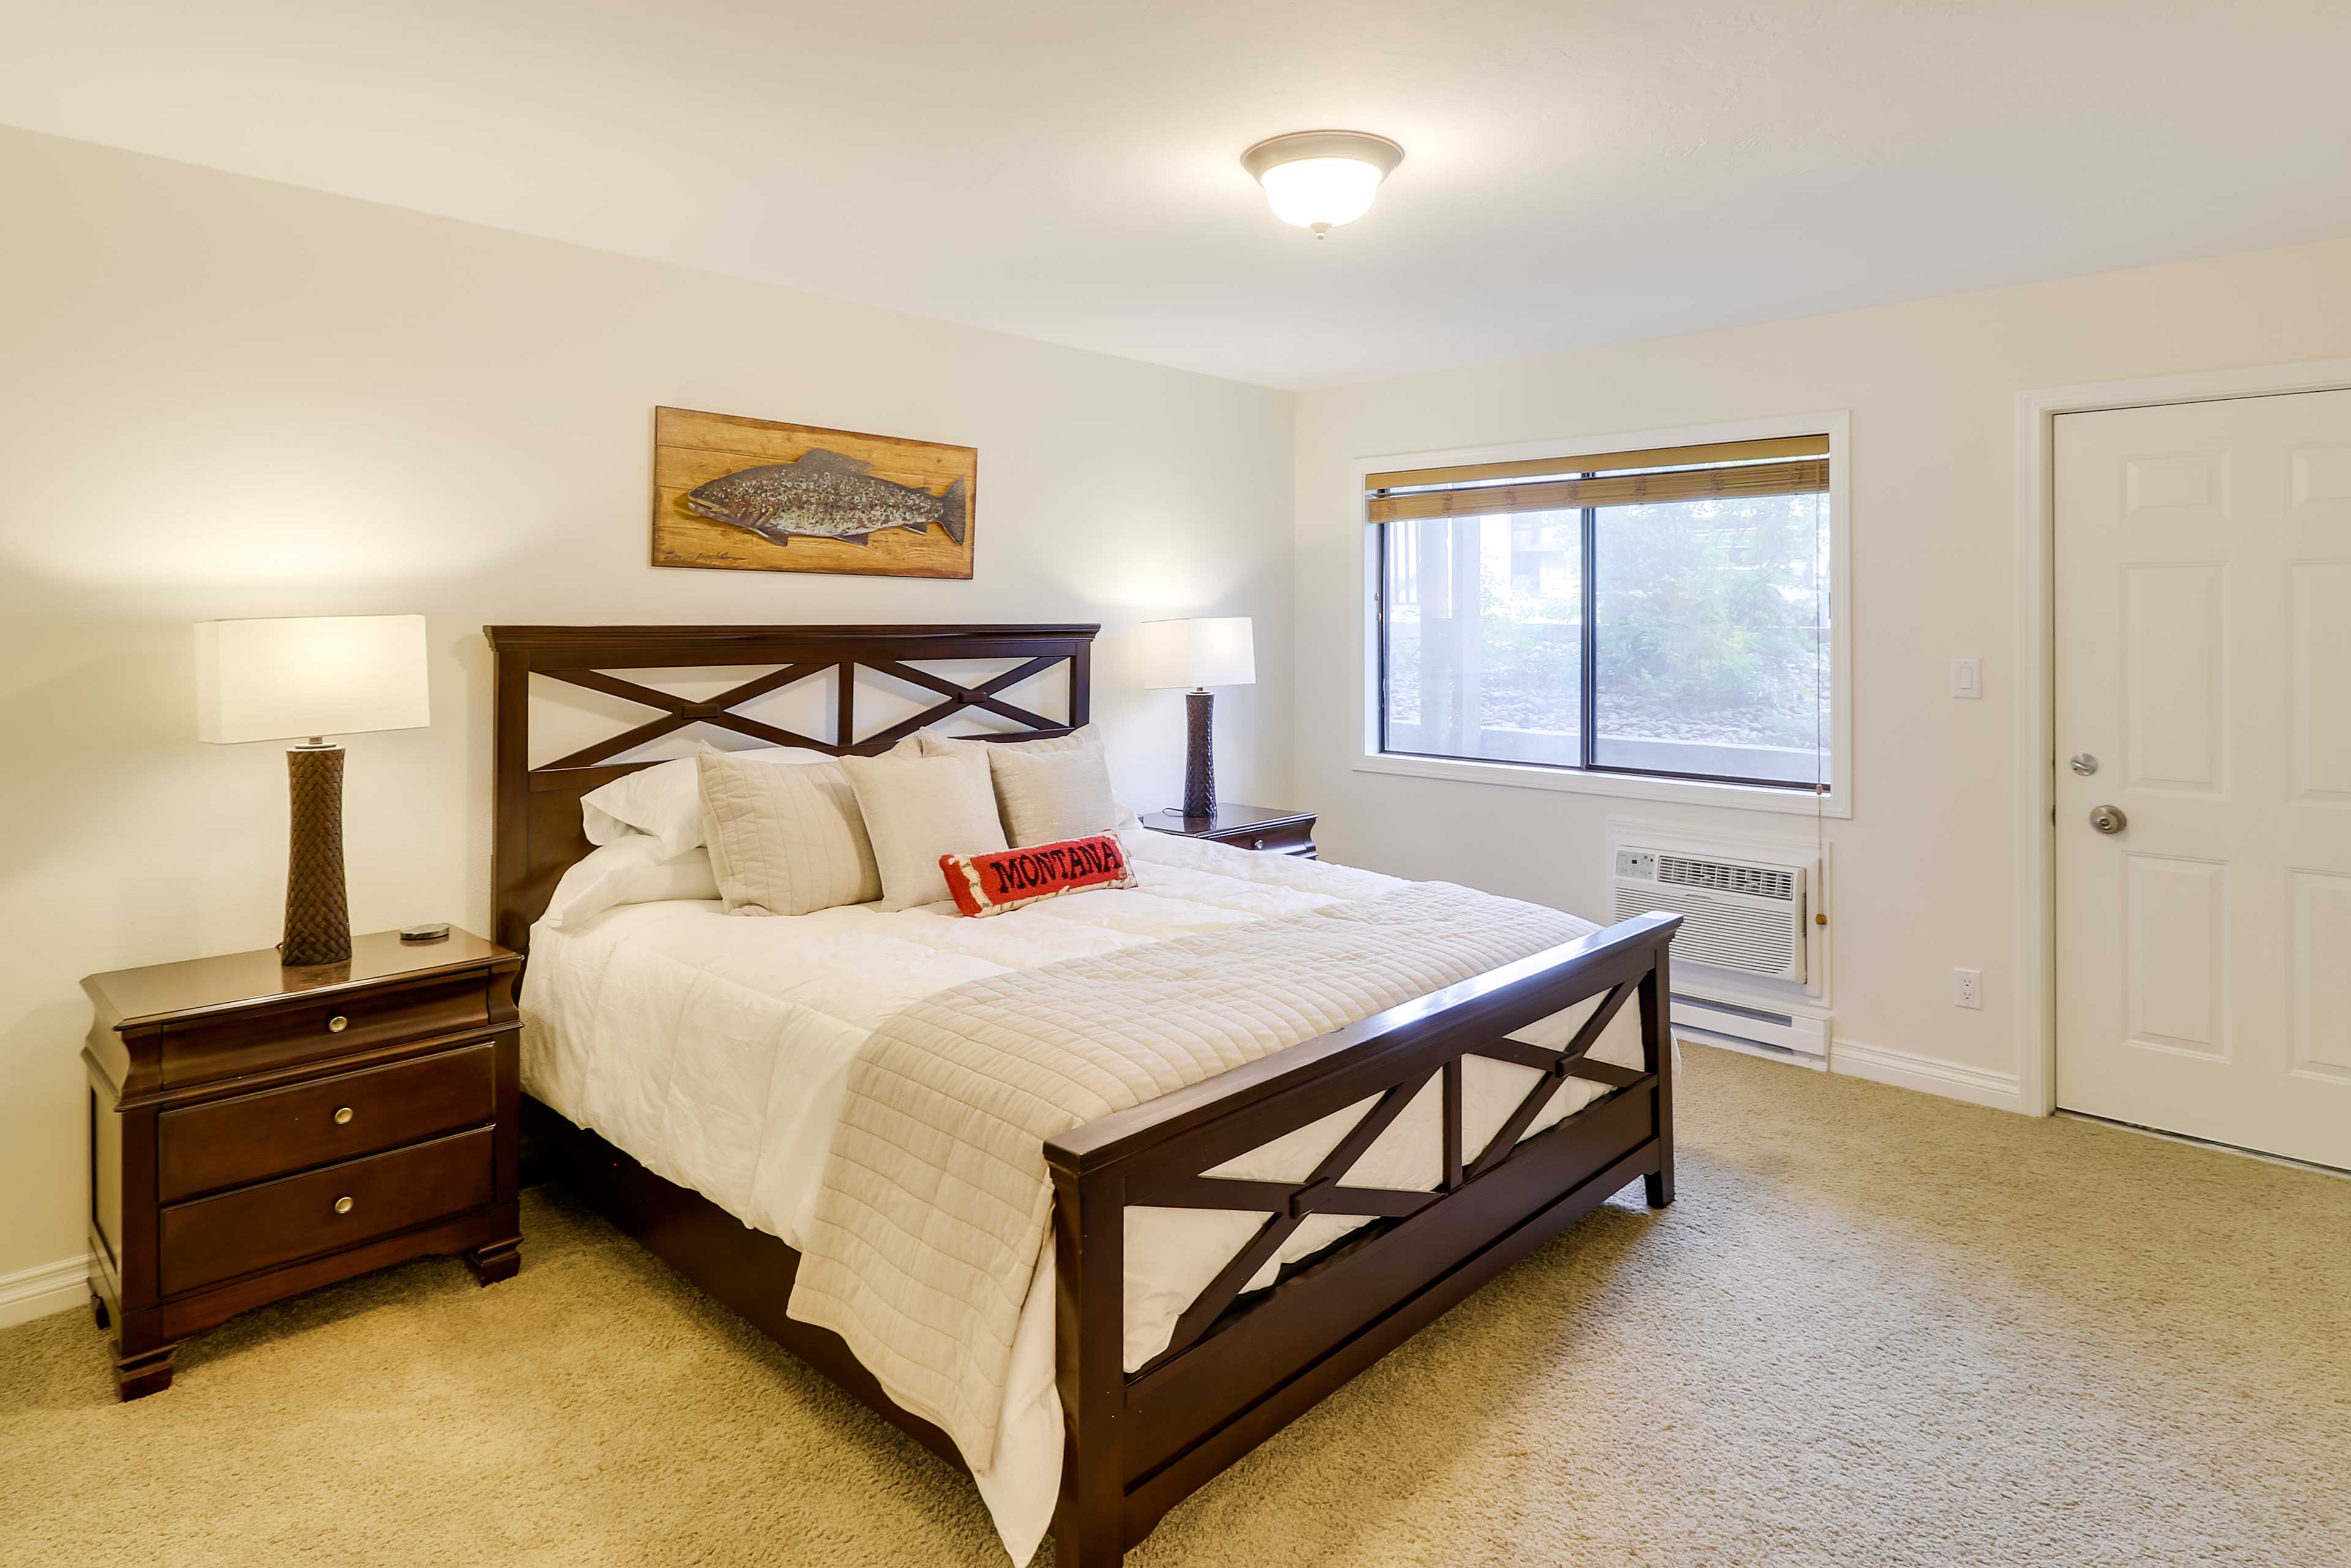 Bedroom Suite | King Bed | Linens Provided | Window A/C Unit